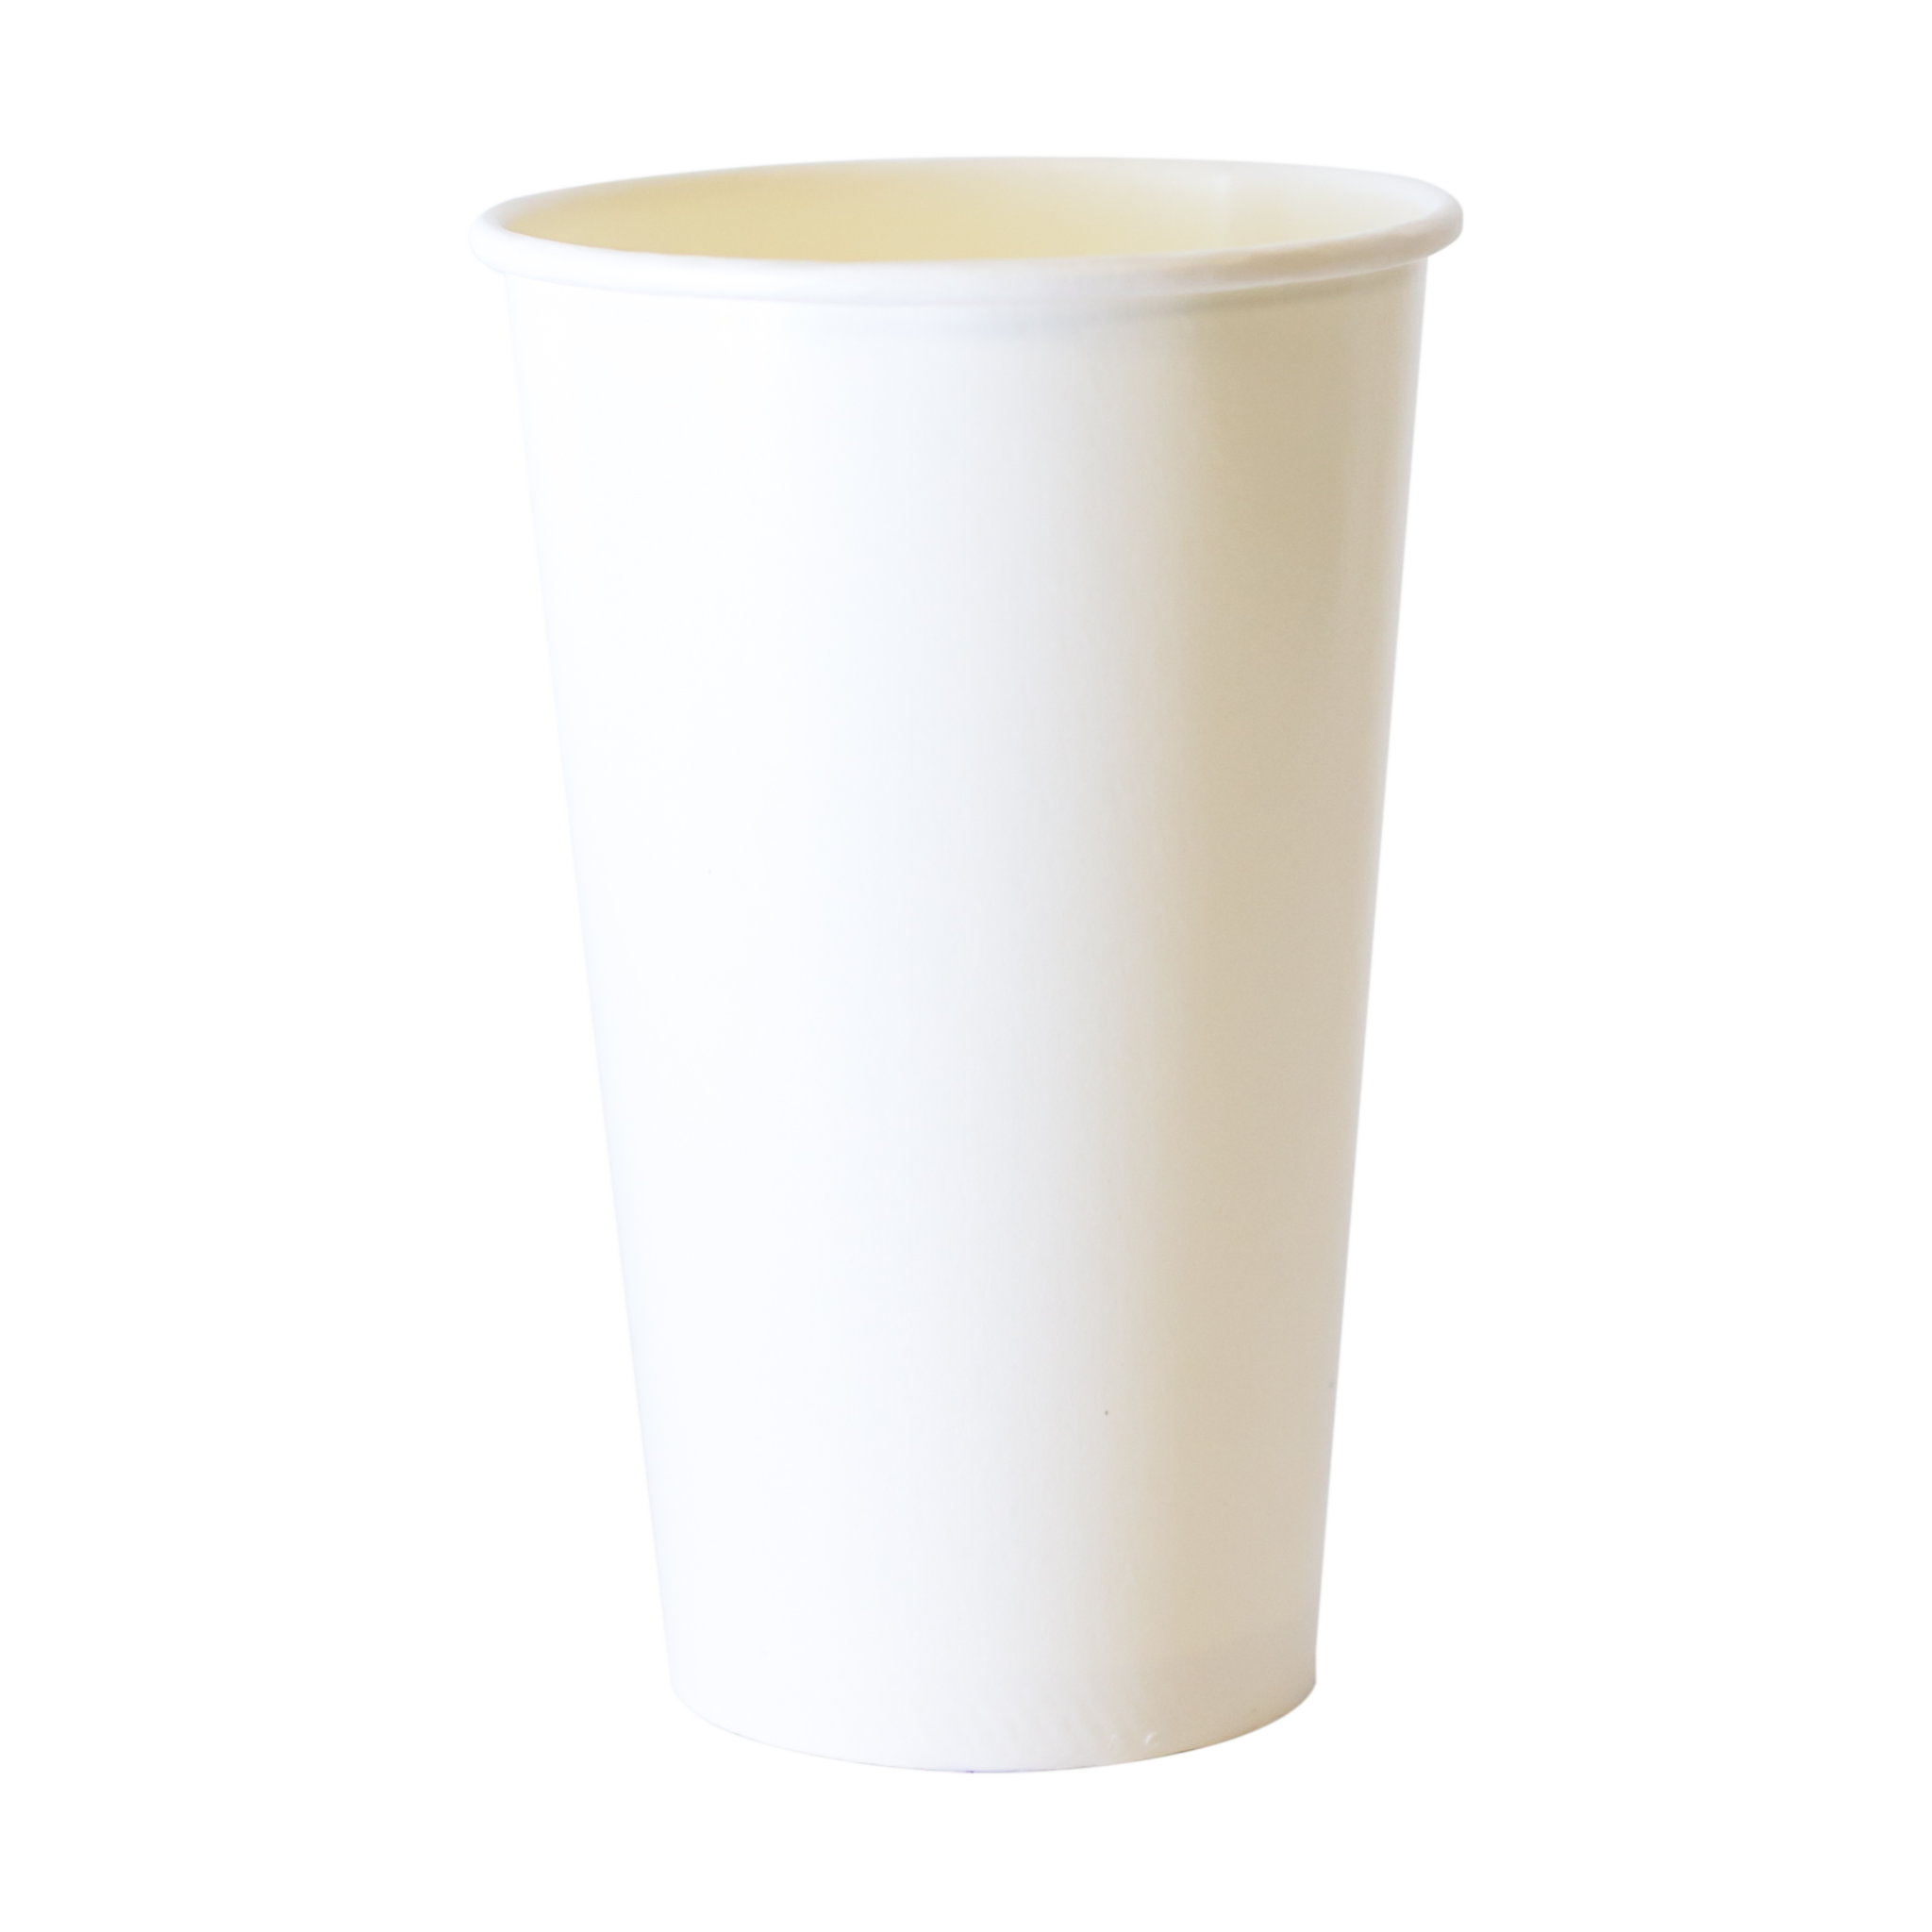 Single Wall Series - 16oz/22oz Cold Paper Cup